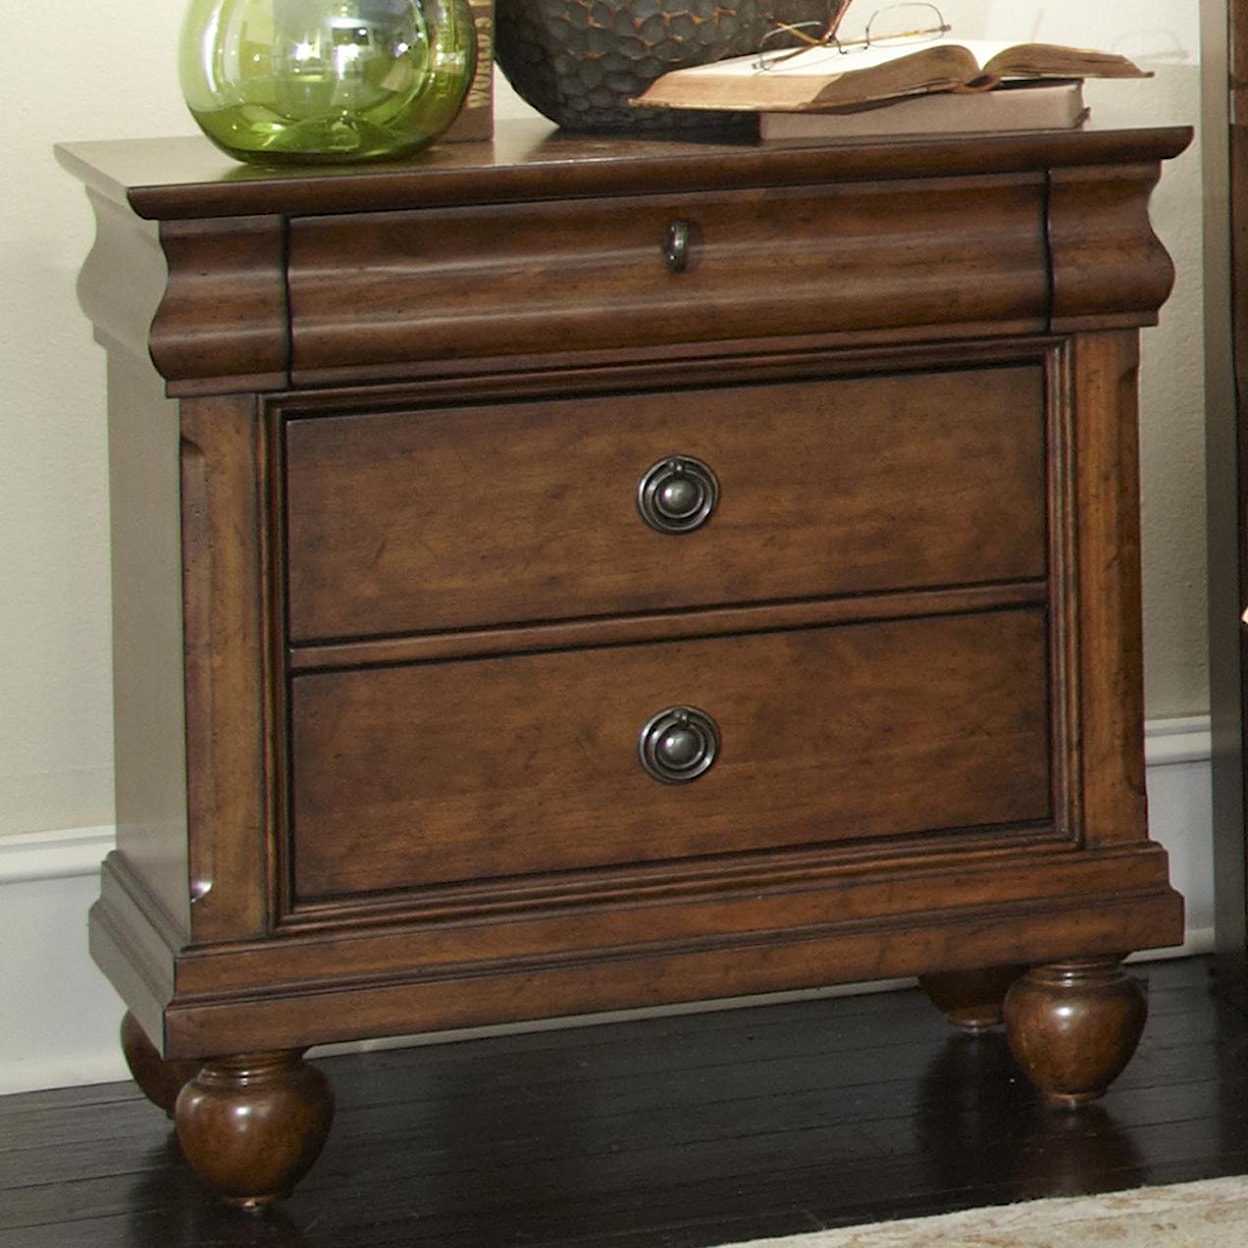 Liberty Furniture Rustic Traditions Three-Drawer Night Stand